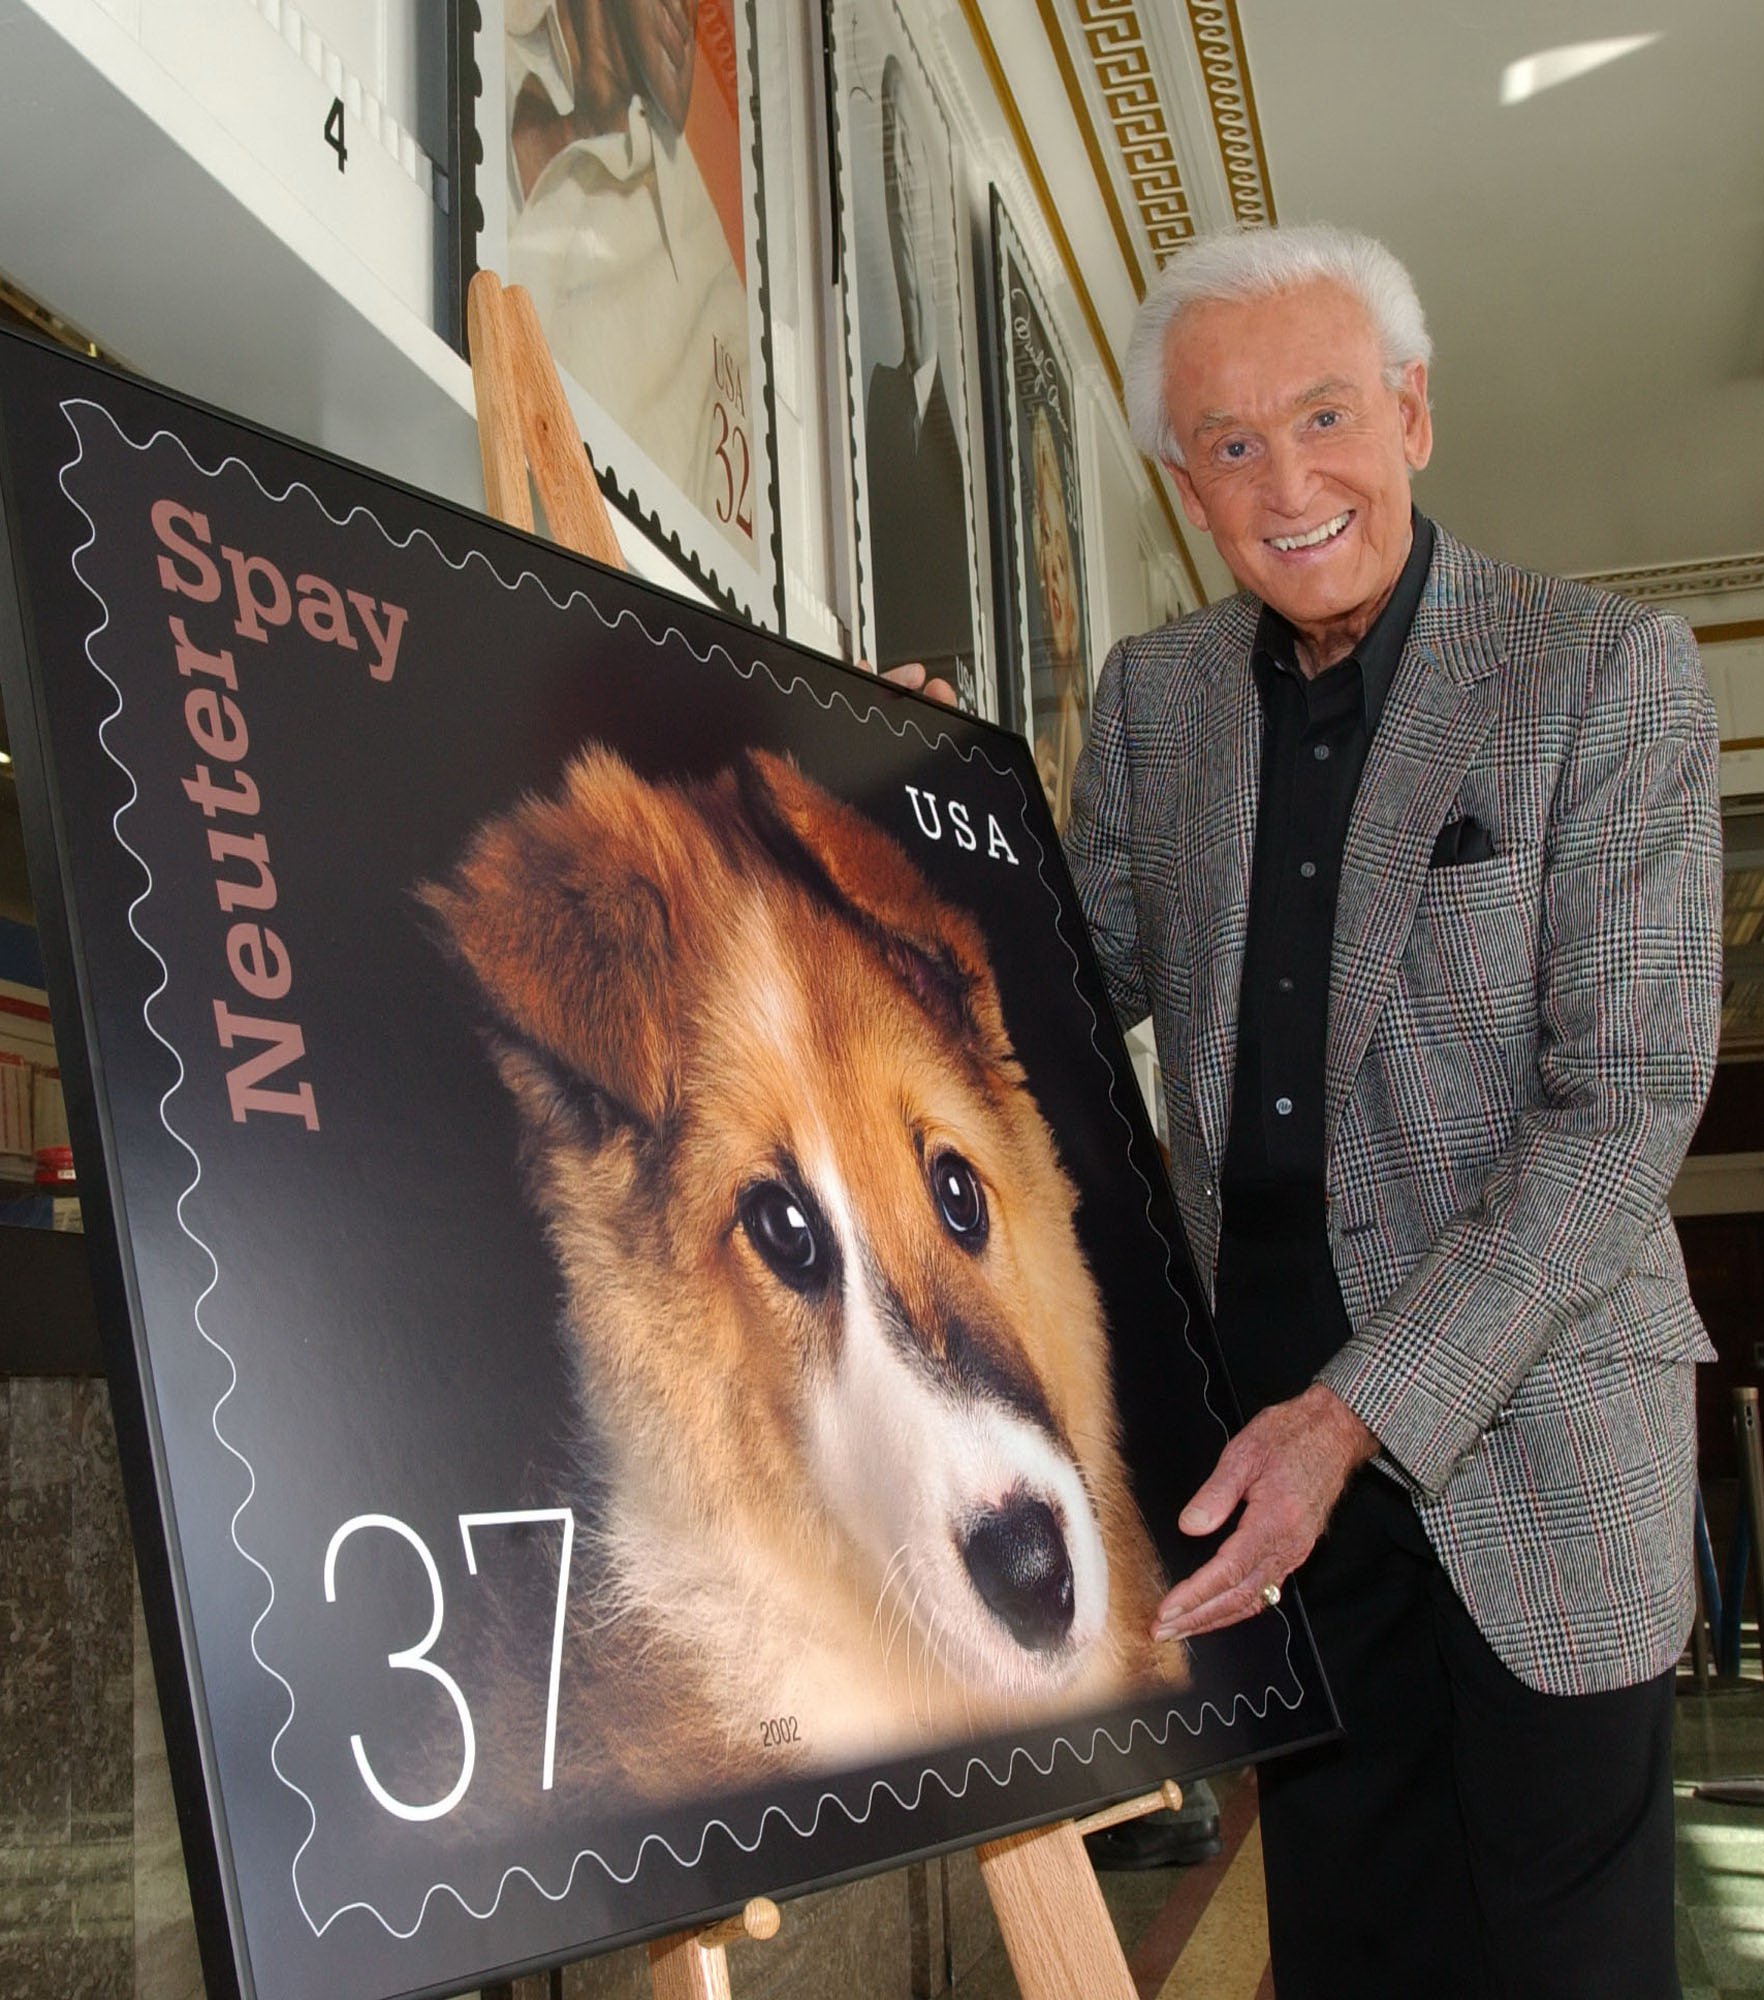 Bob Barker purchasing the new 37-cent Neuter or Spay commemorative postage stamps at U.S. Post OfficesSeptember 20, 2002 | Source: Getty Images